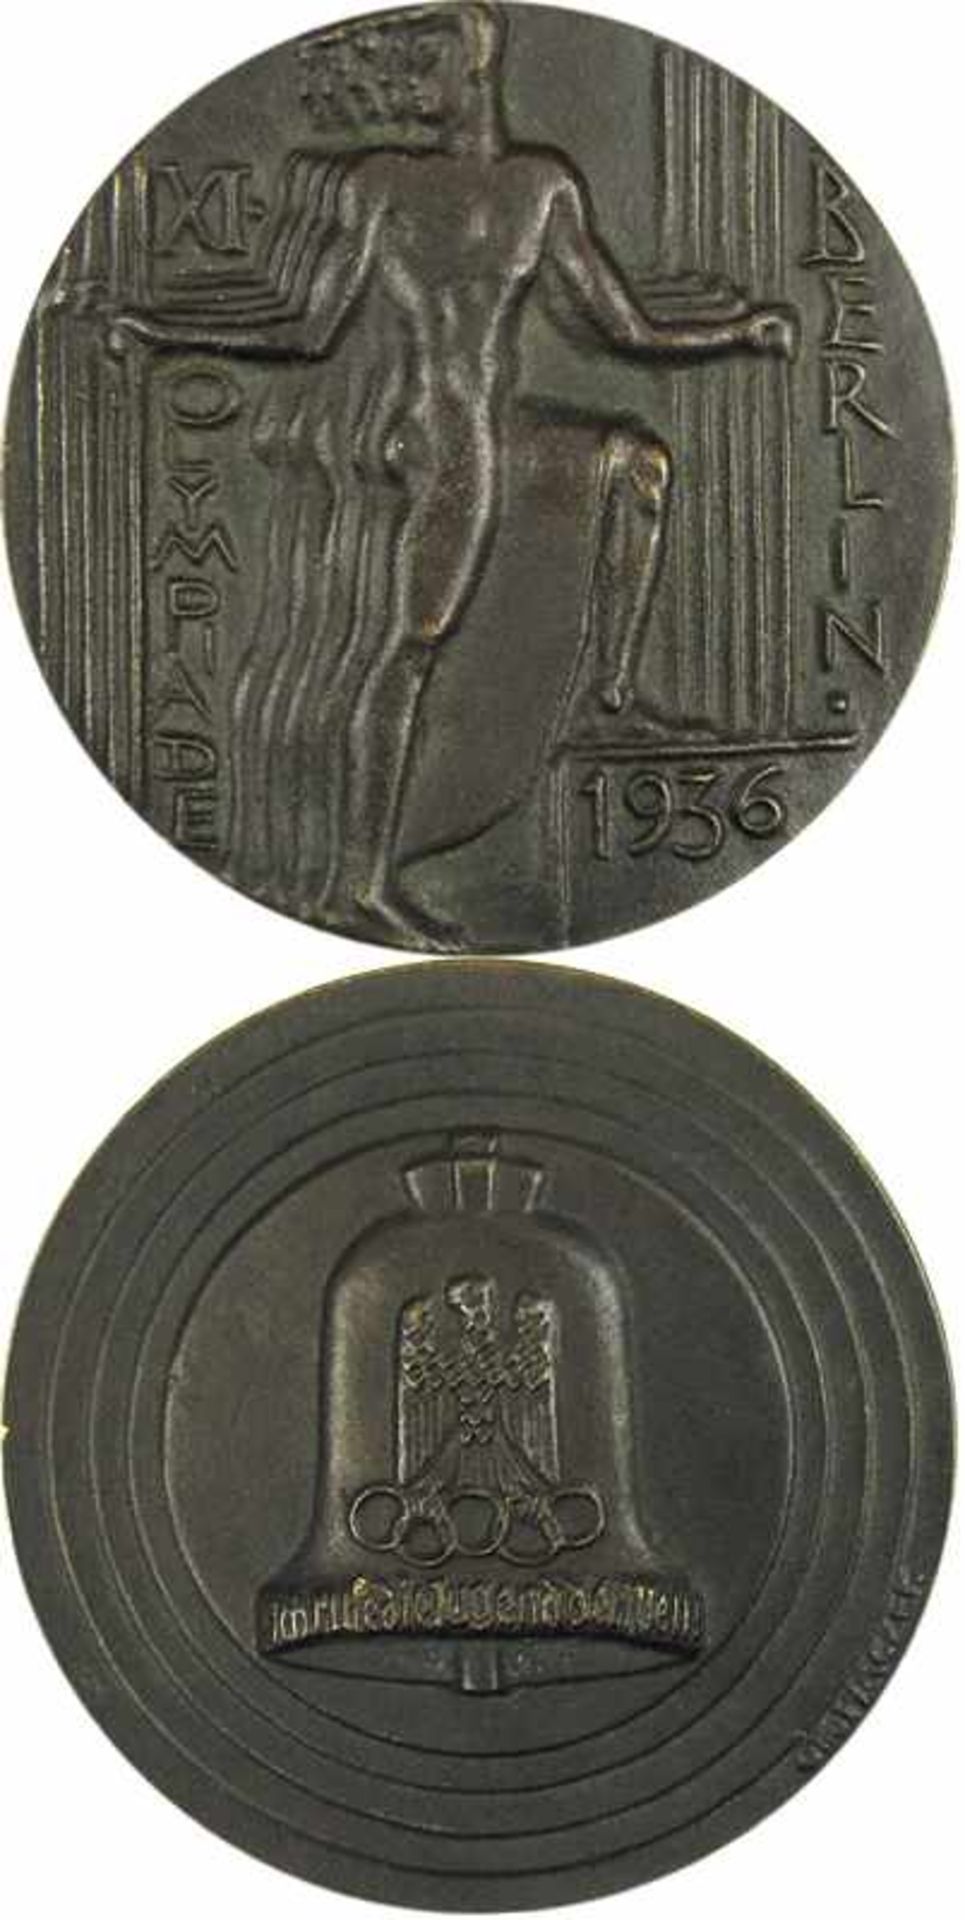 Olympic games Berlin 1936. Participation medal - Official particpation badge Olympic Games 1936 in